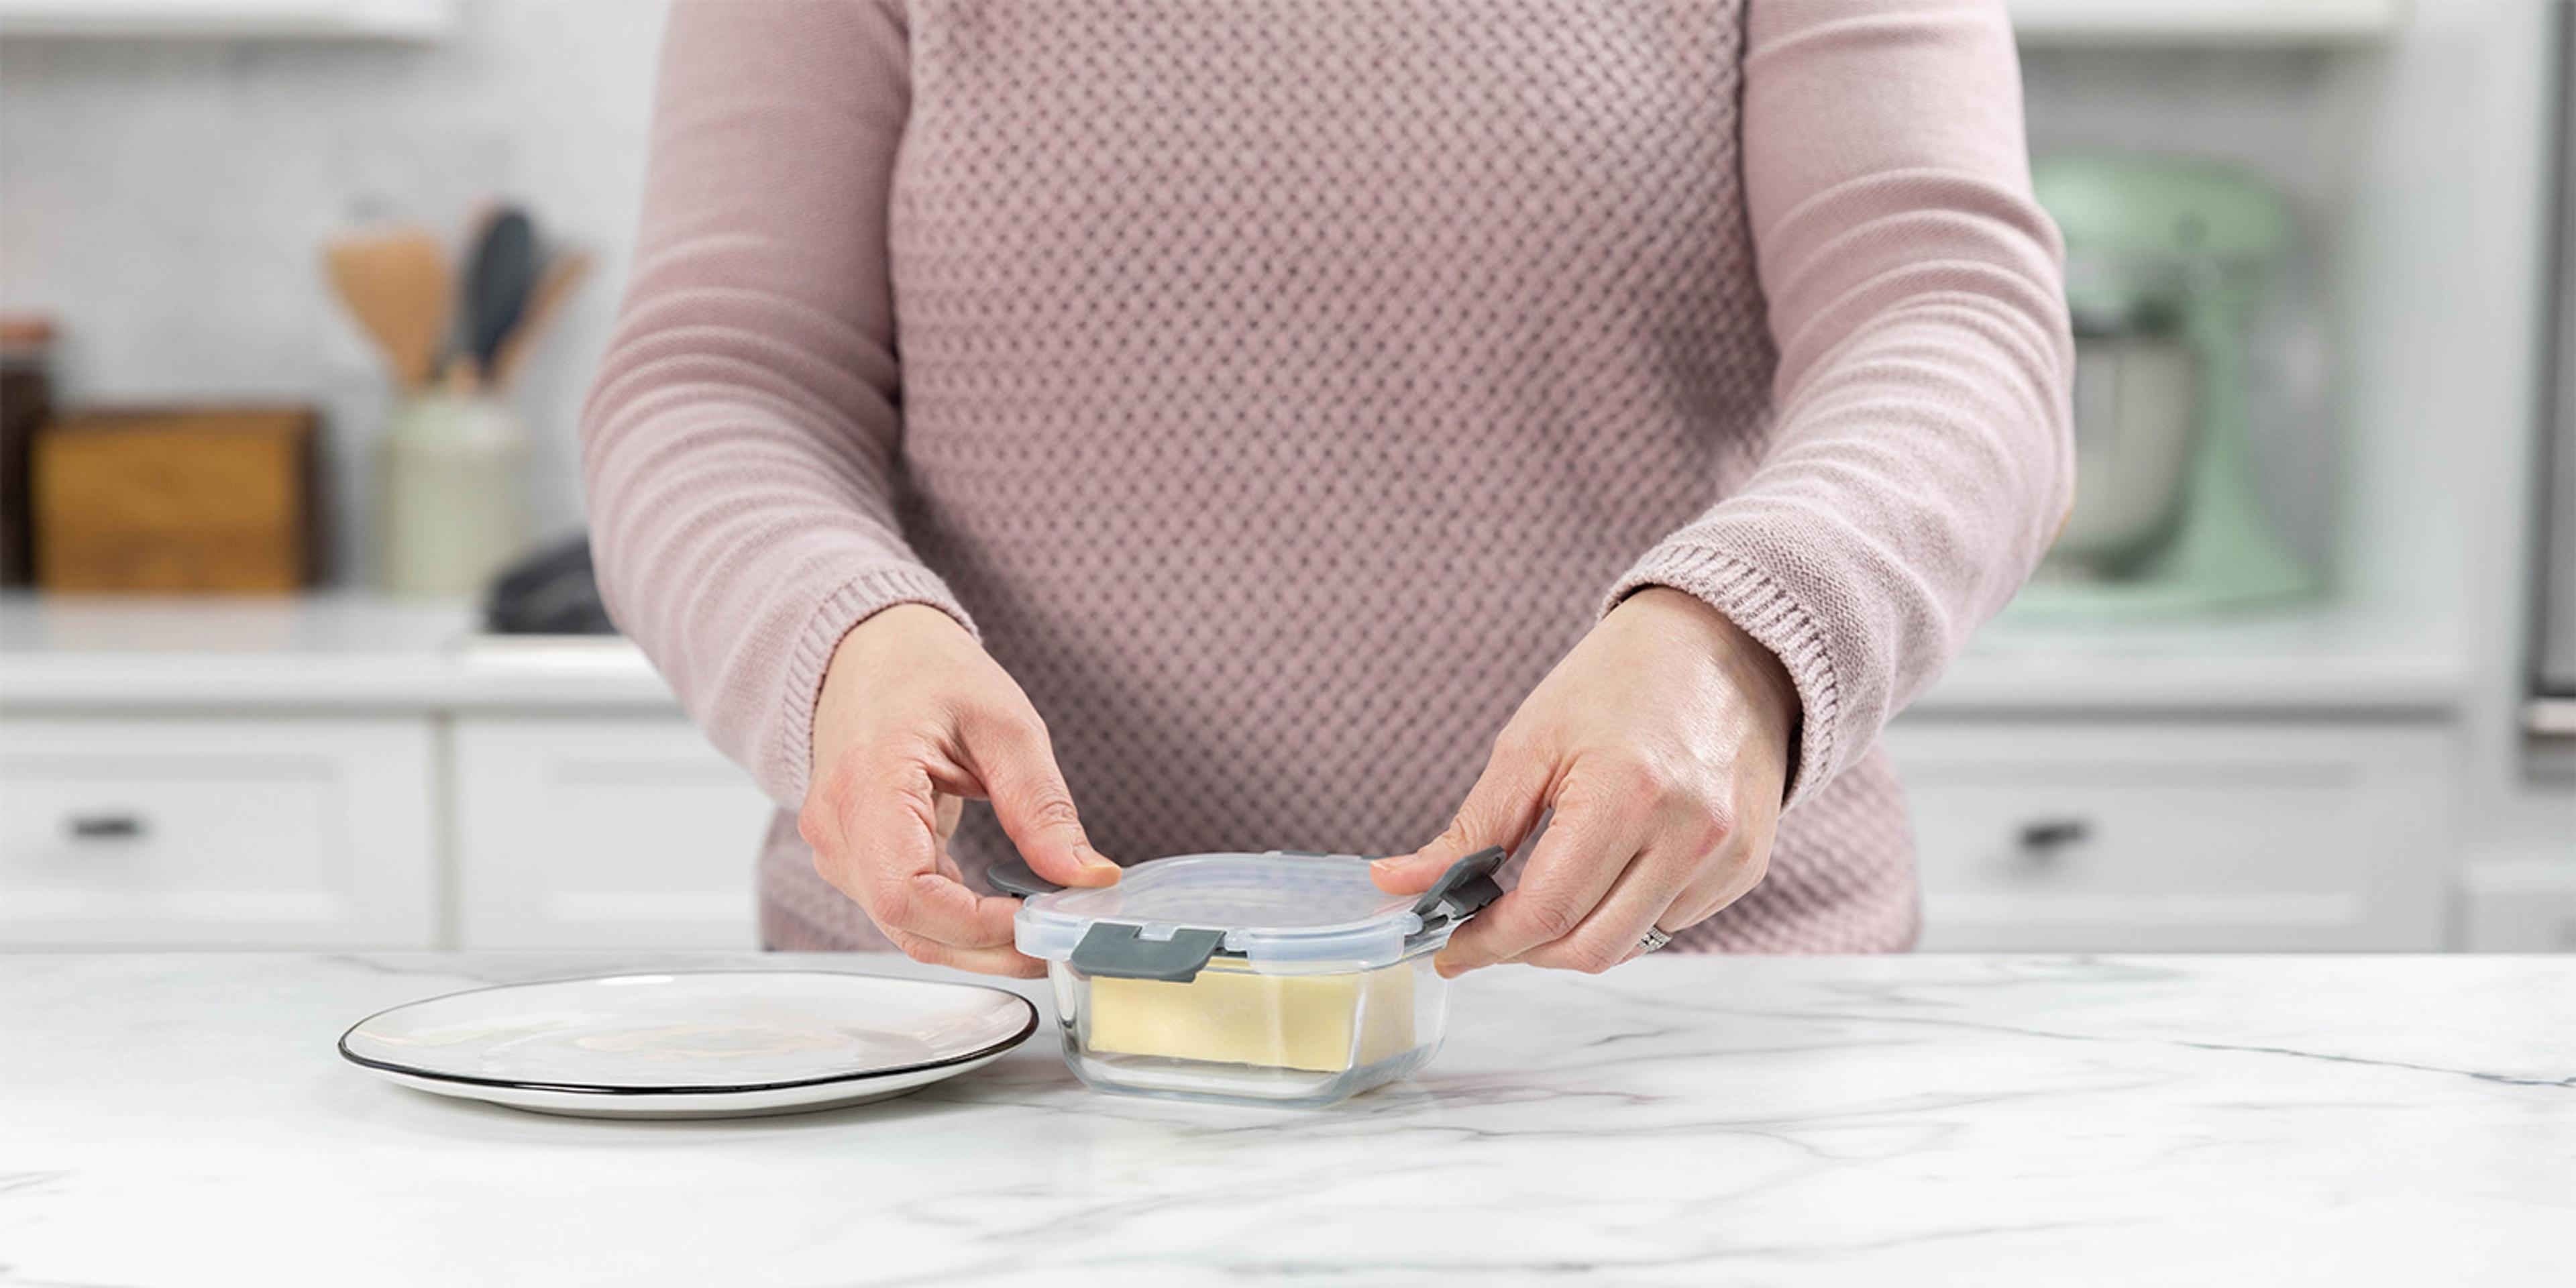 A woman puts cheese in an airtight container.